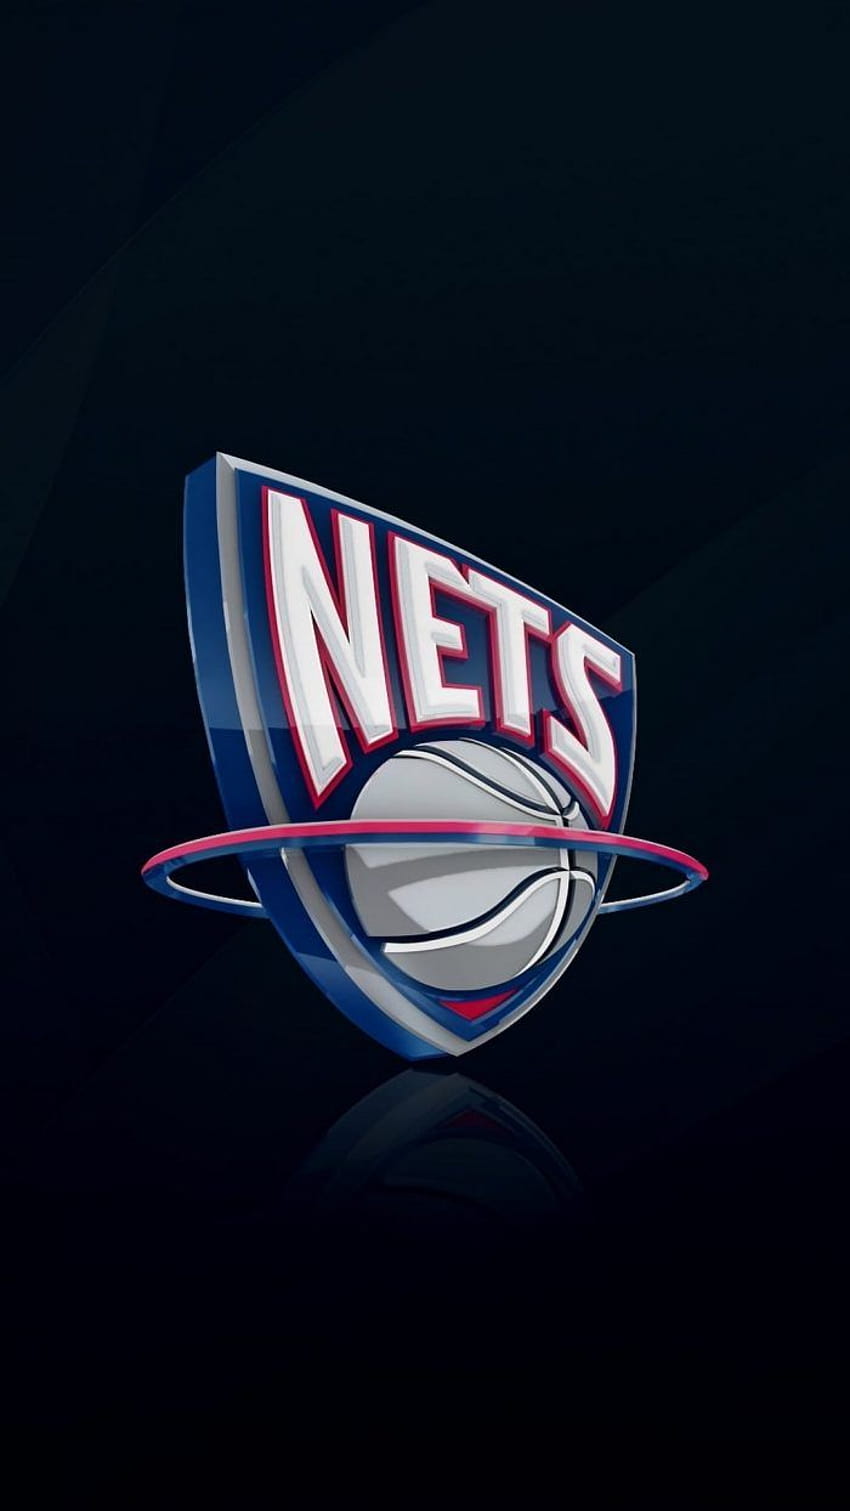 BROOKLYN NETS nba basketball 1 227875  for your  Mobile  Tablet  Explore Brooklyn Nets iPhone  Brooklyn Nets  Brooklyn  Brooklyn Nets  Logo HD phone wallpaper  Pxfuel